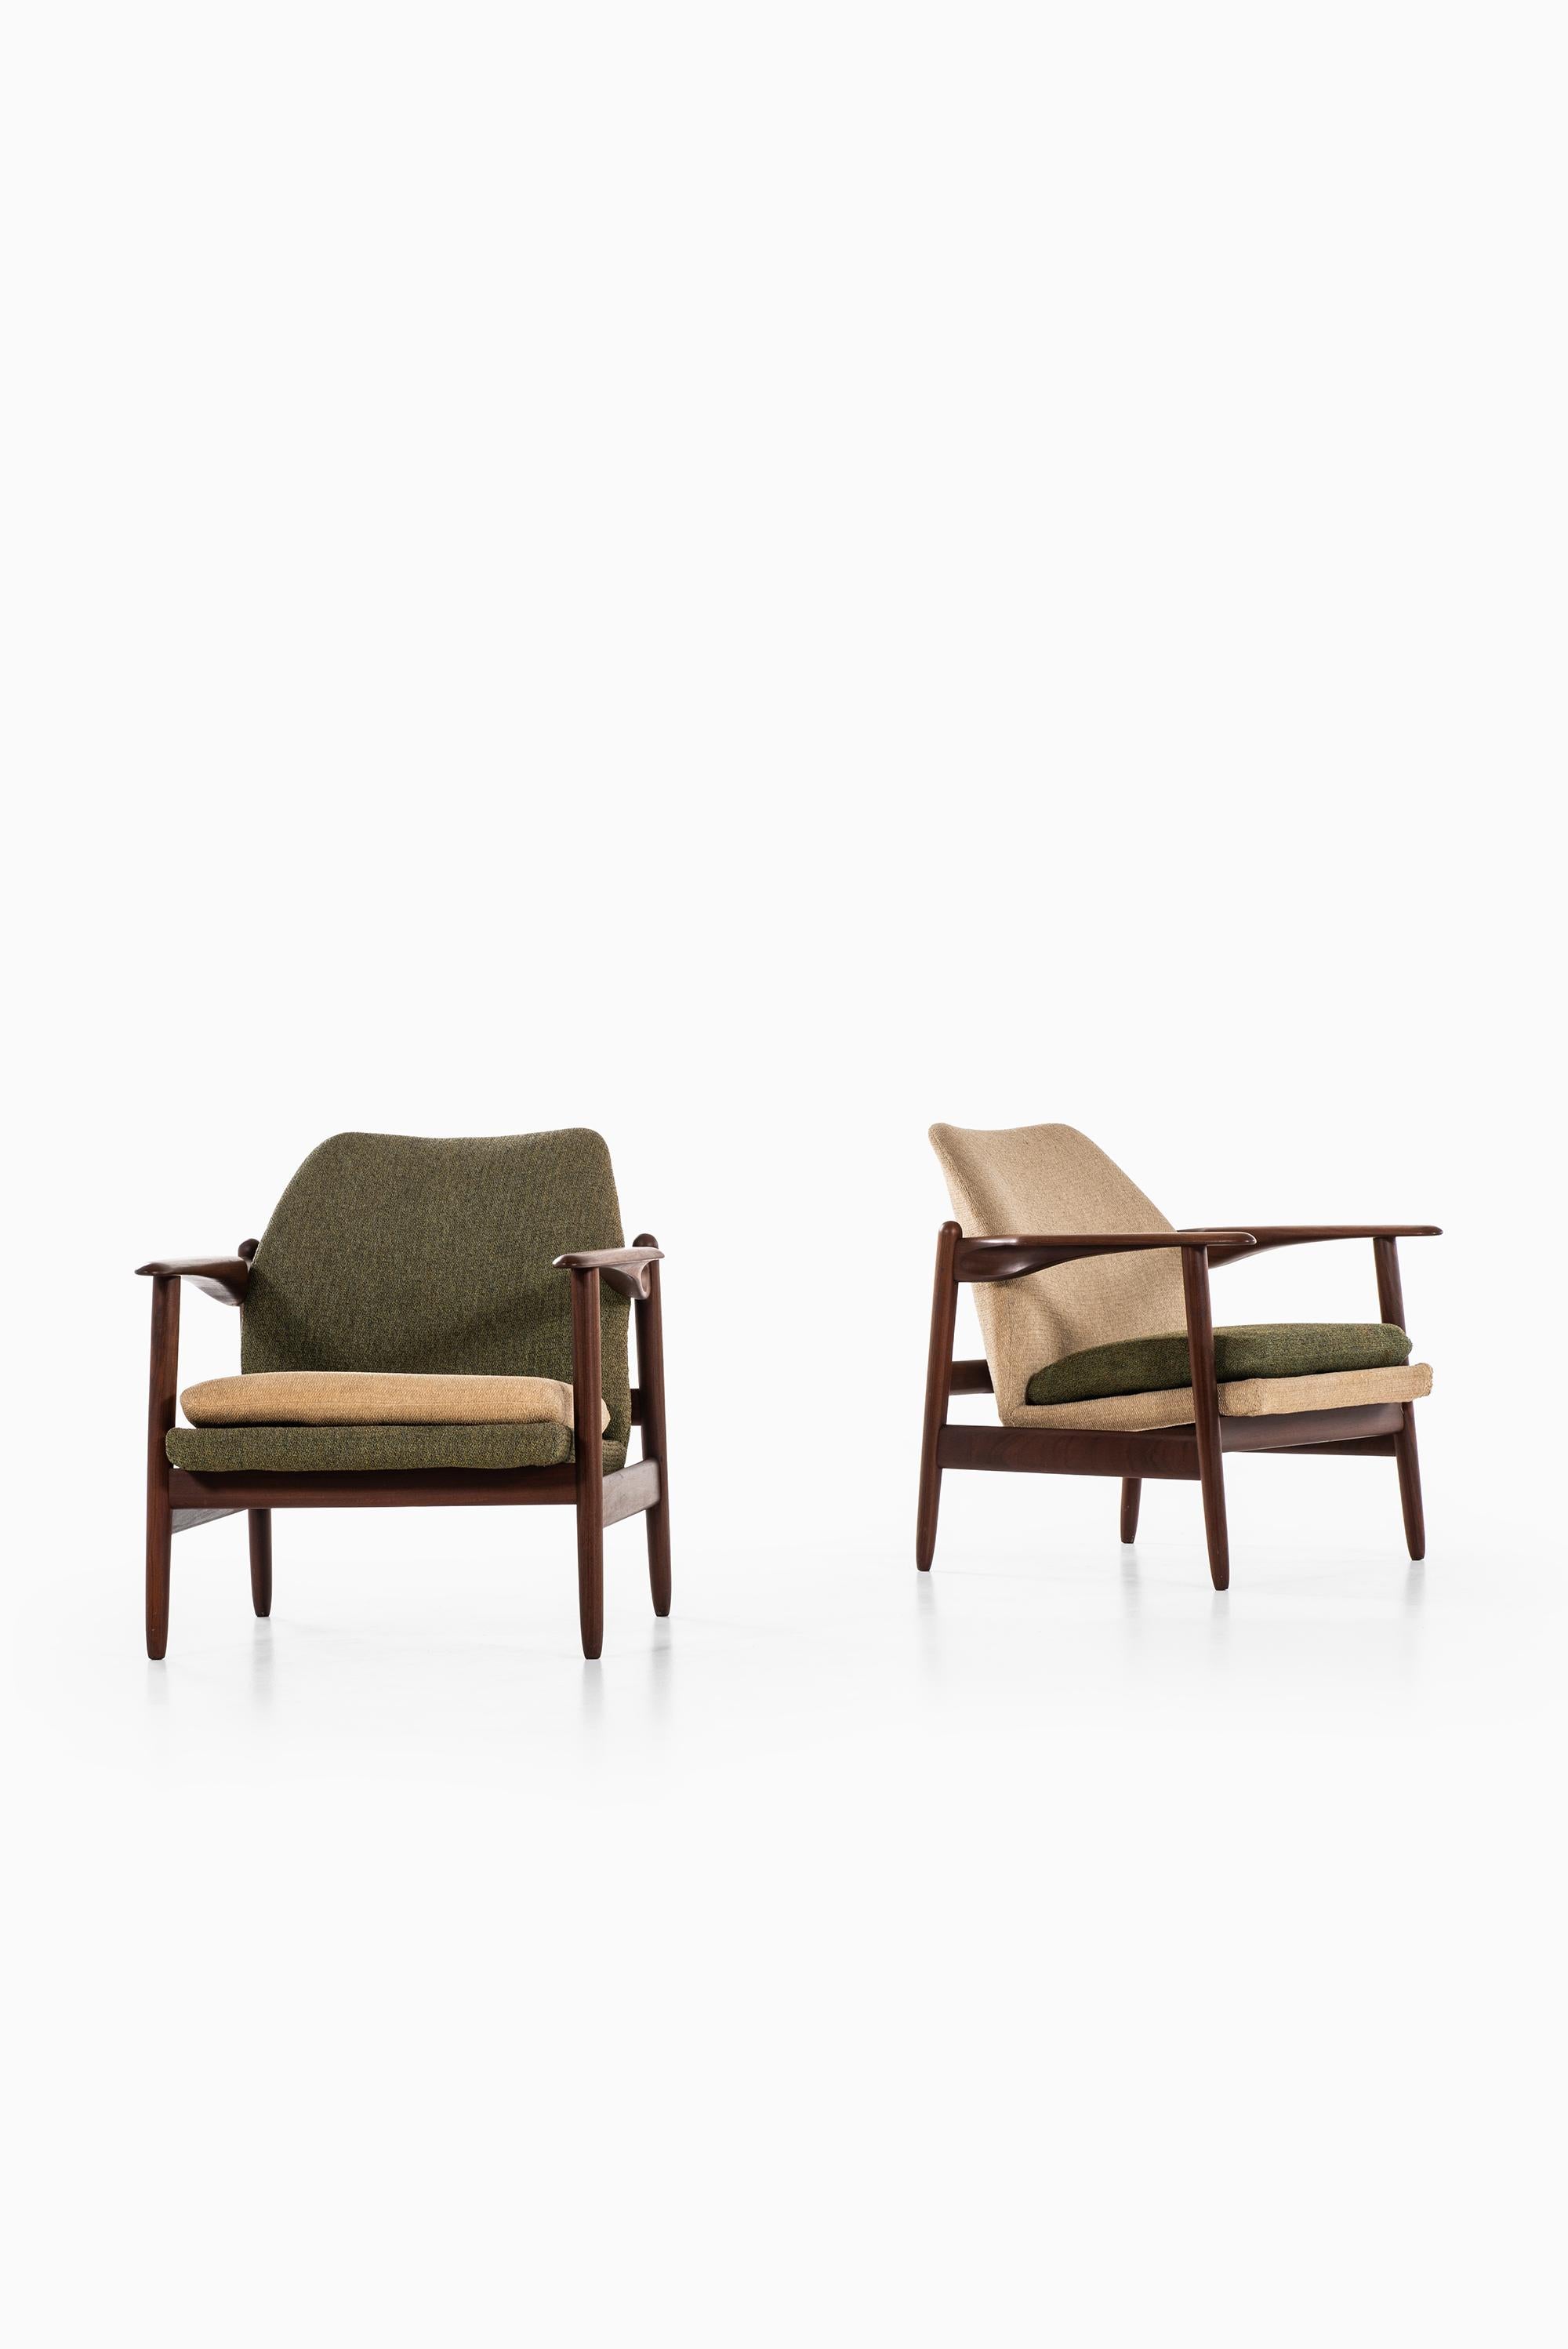 Scandinavian Modern Pair of Easy Chairs Produced in Denmark